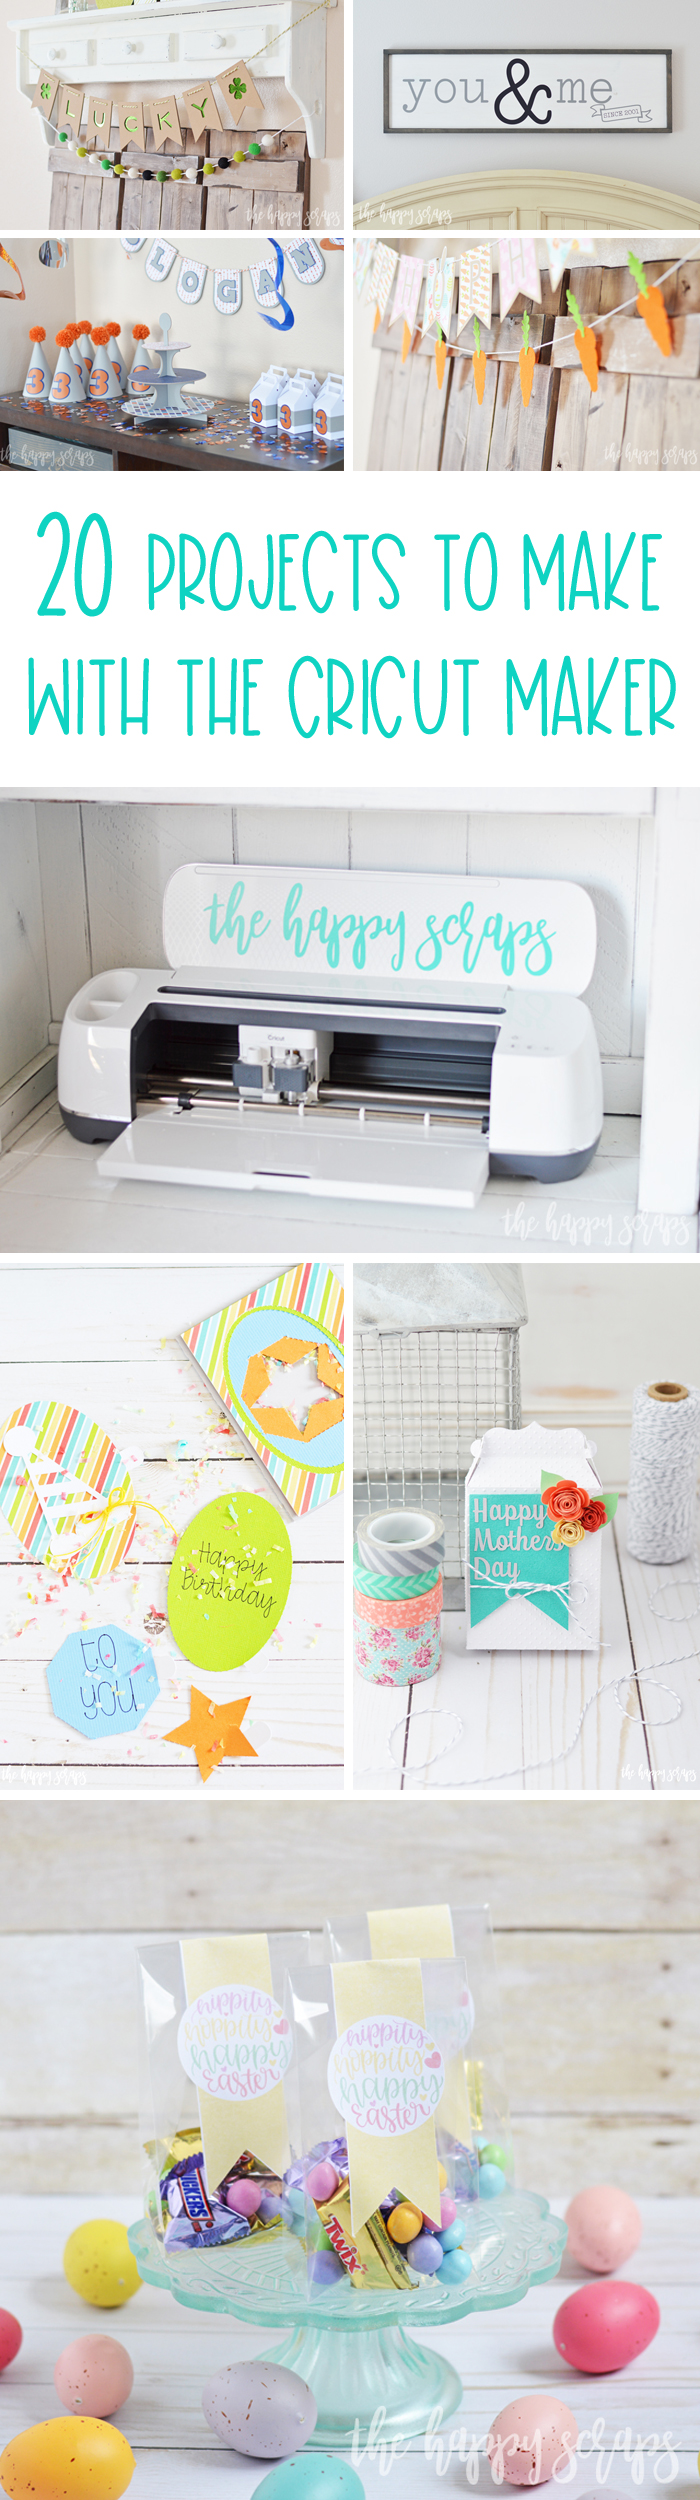 Check out these 20 Projects to Make with the Cricut Maker! You're sure to be inspired to start creating everything from holiday decor to parties! 